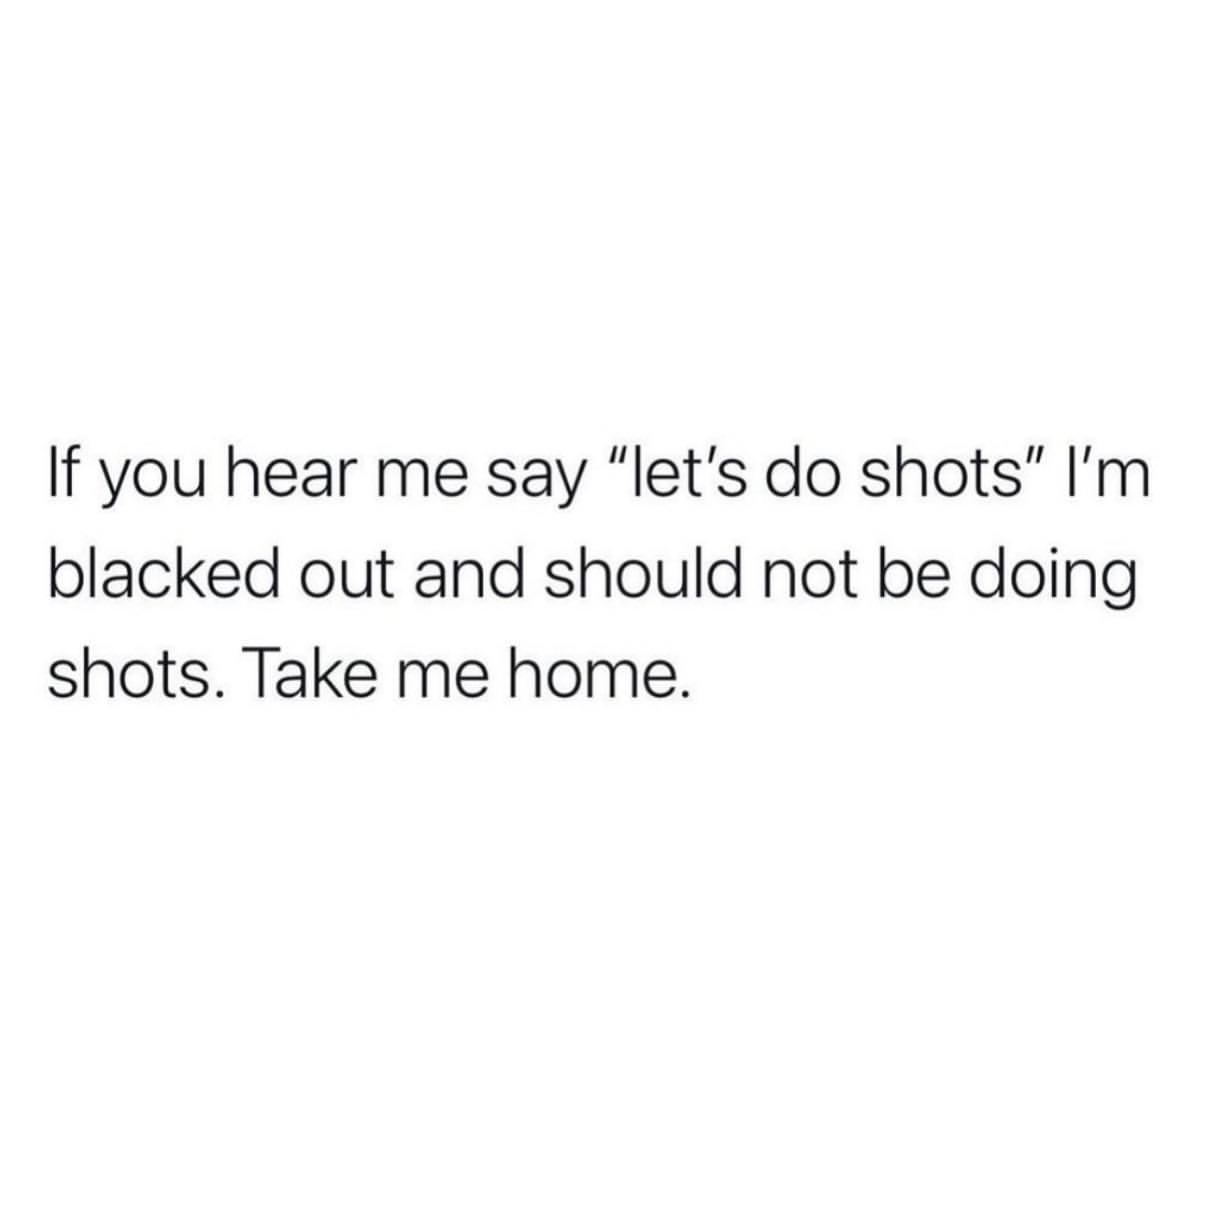 If you hear me say "let's do shots" I'm blacked out and should not be doing shots. Take me home.